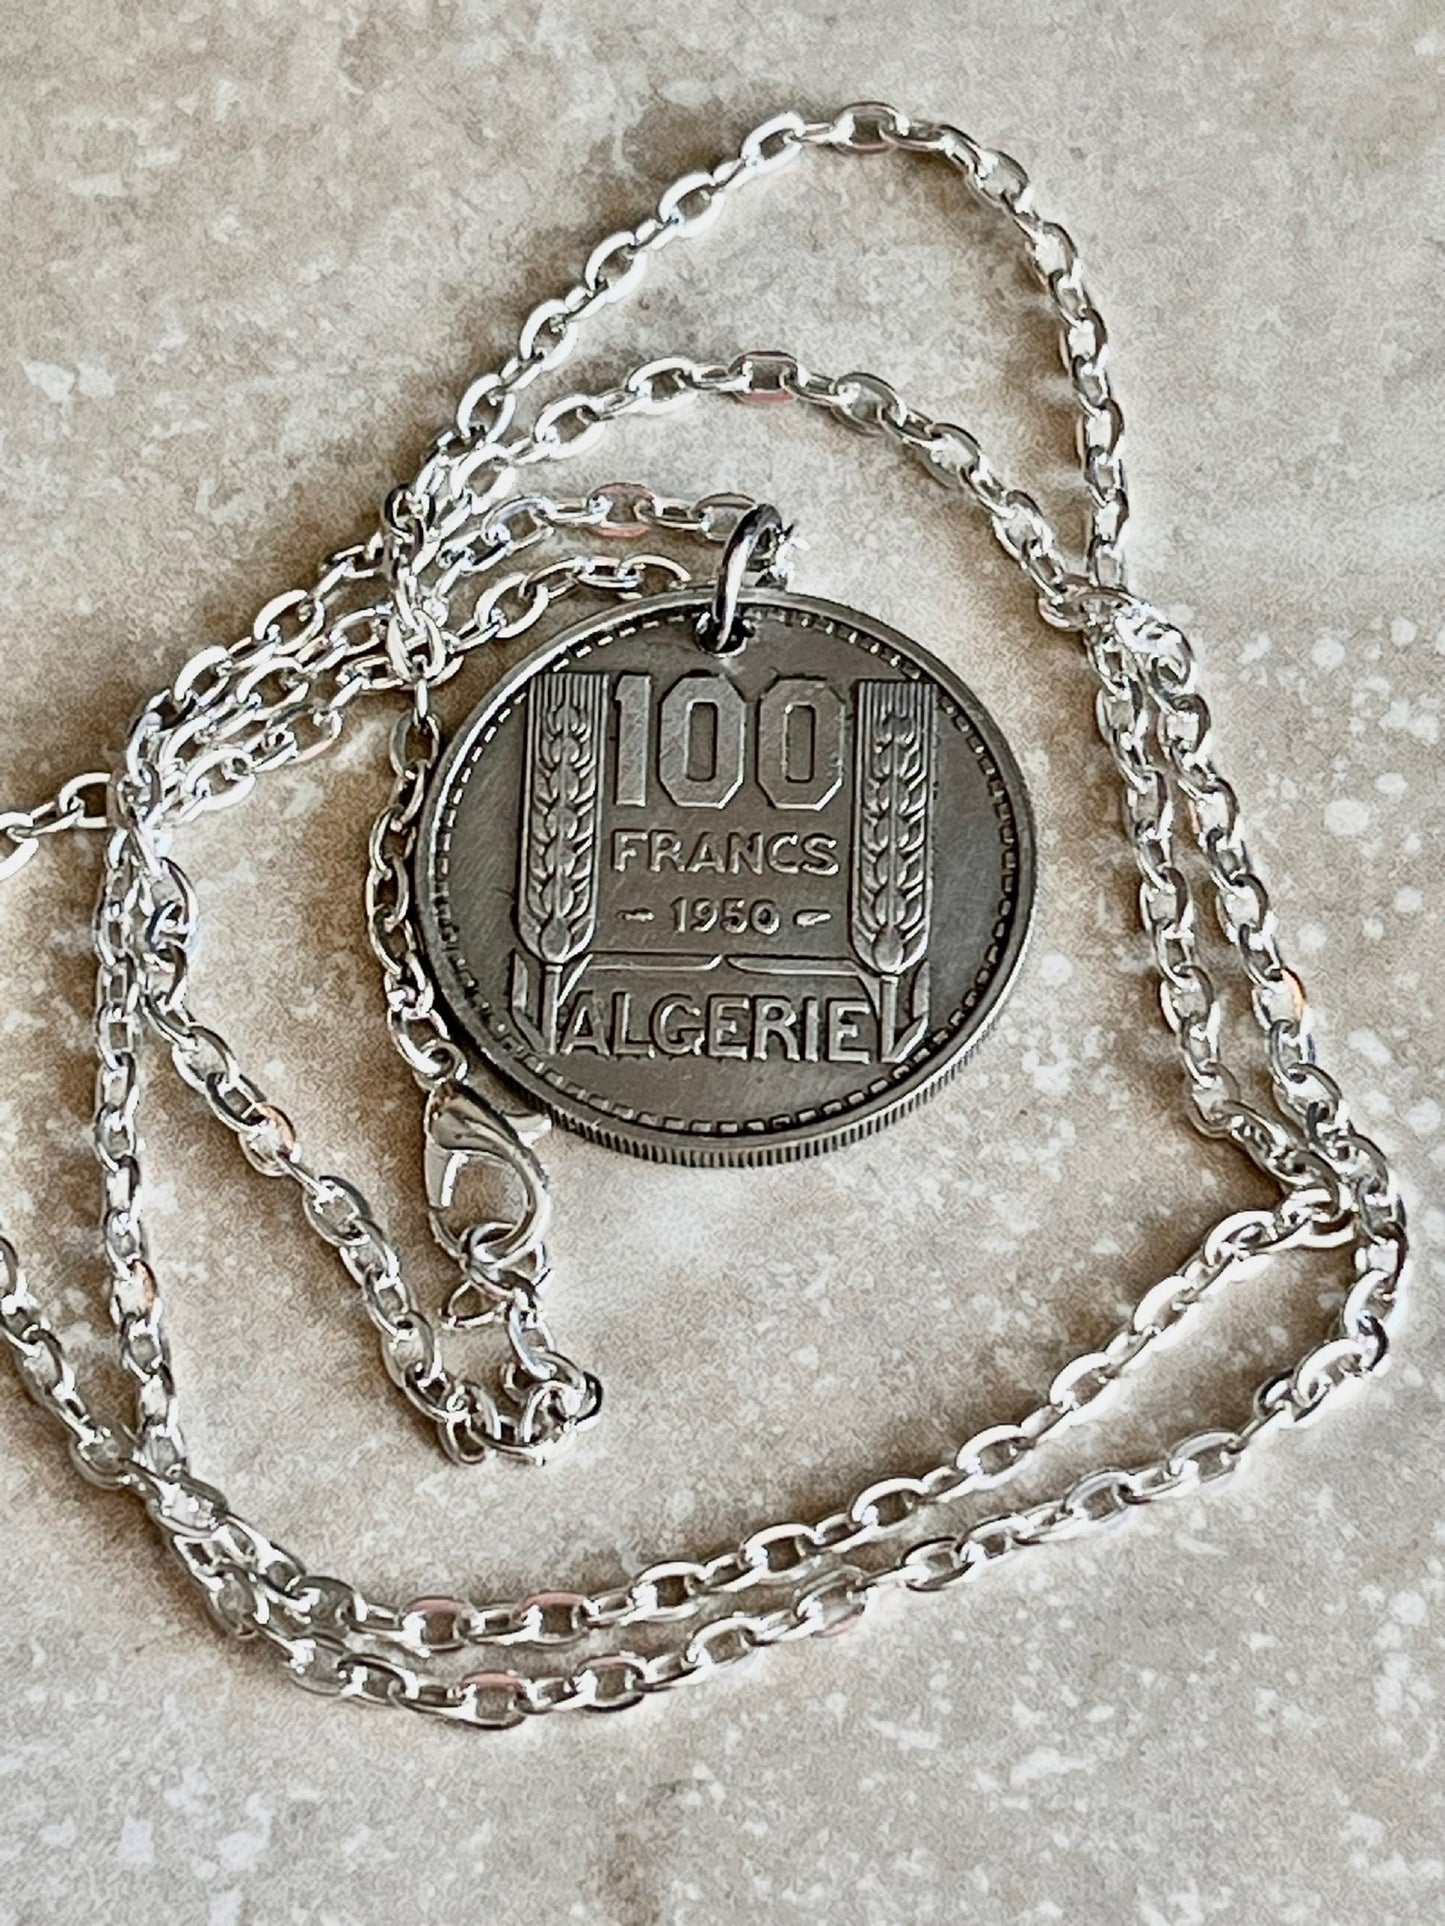 France Coin Necklace French 100 Franc Liberte Egalite Fraternite Personal Pendant Jewelry Gift Friend Charm For Him Her World Coin Collector